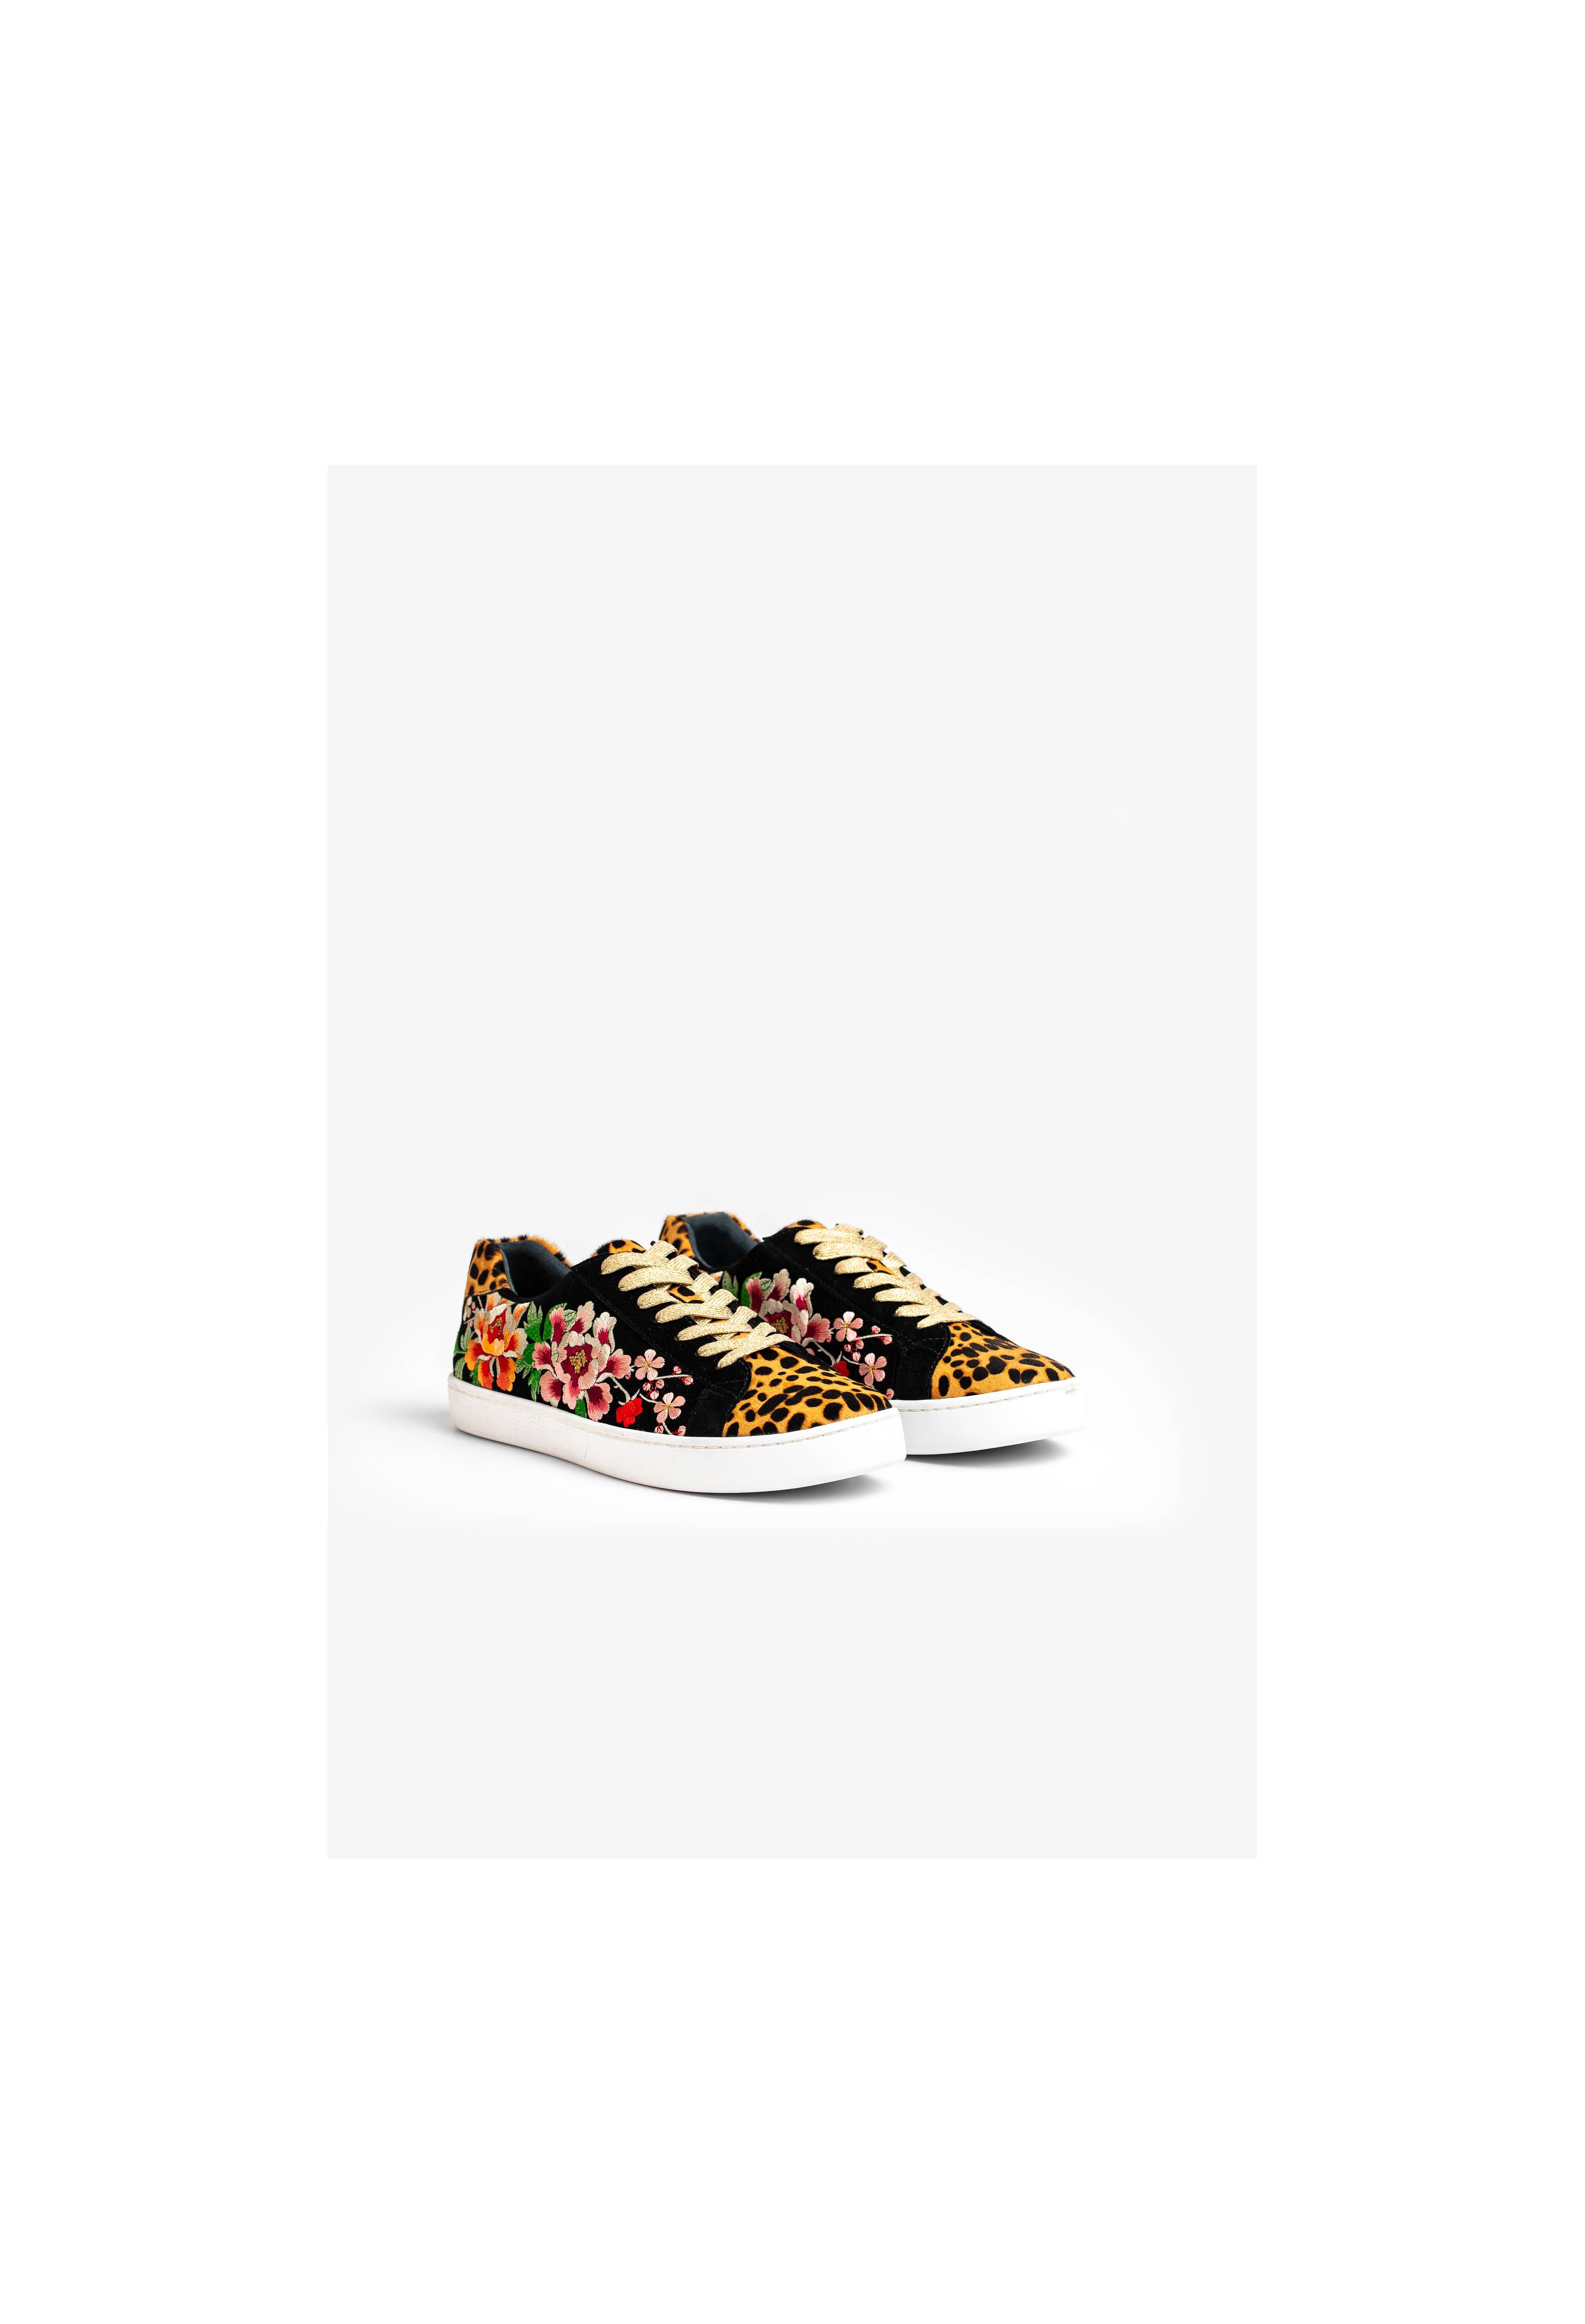 Acacia Leopard Sneaker, , large image number 2